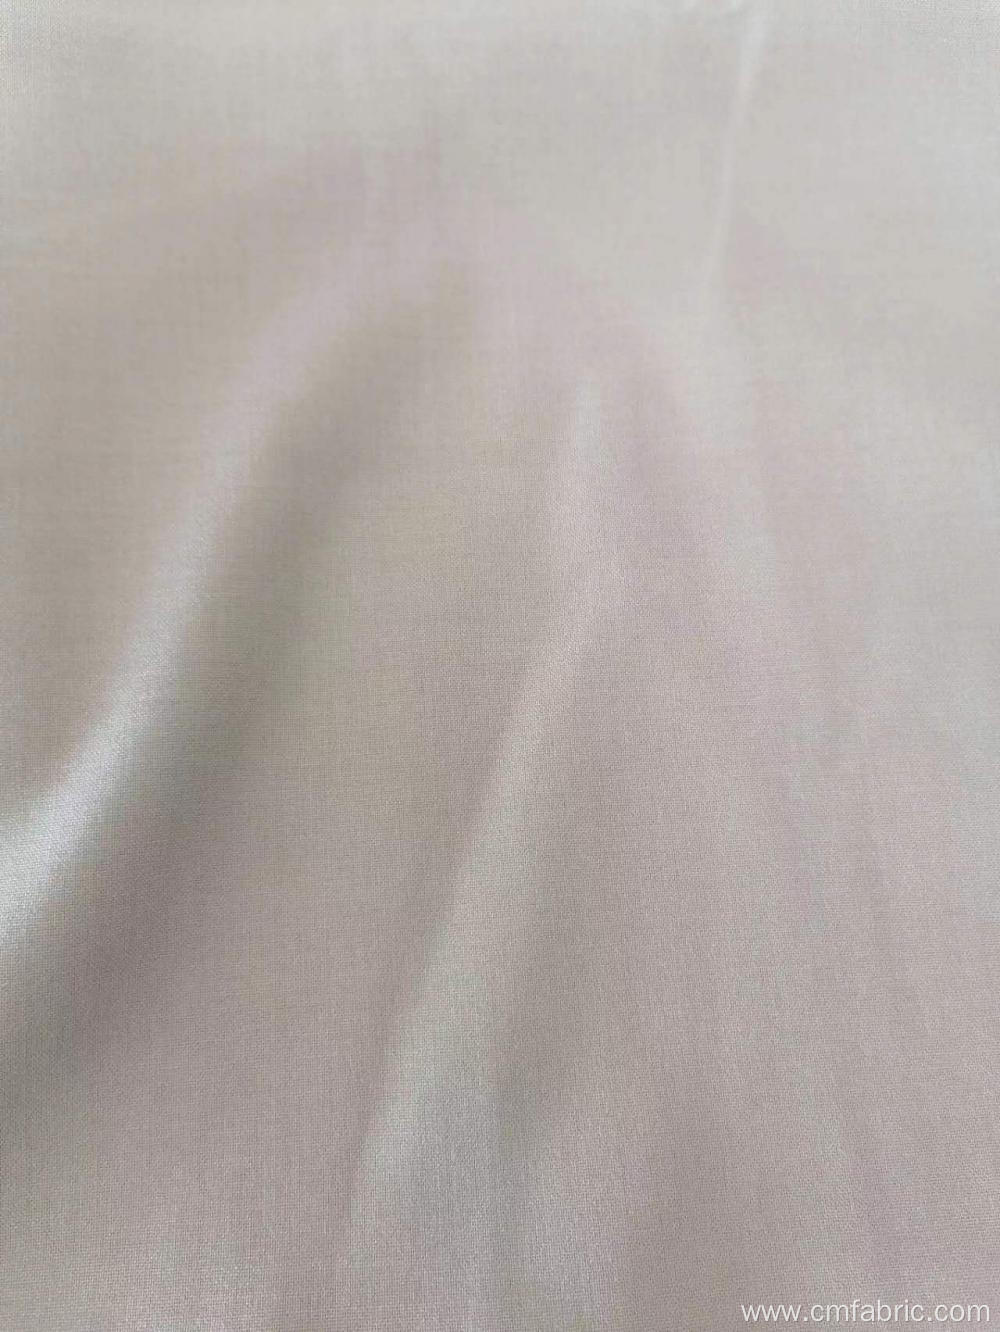 Woven Polyester viscose plain weave spandex fabric